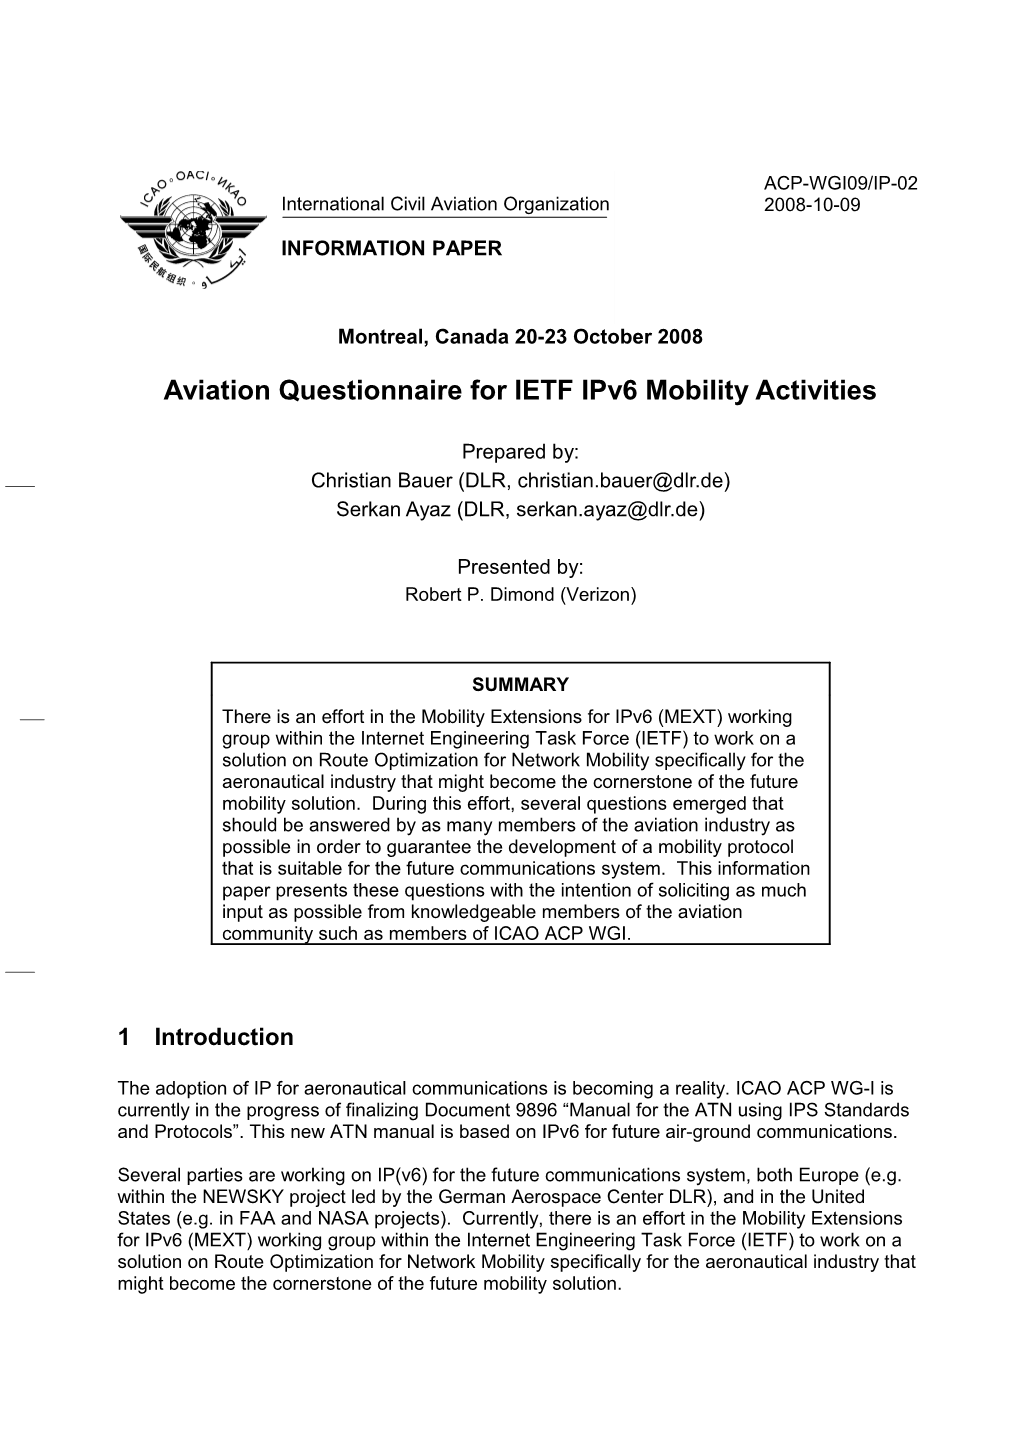 Aviation Questionnaire for IETF Ipv6 Mobility Activities